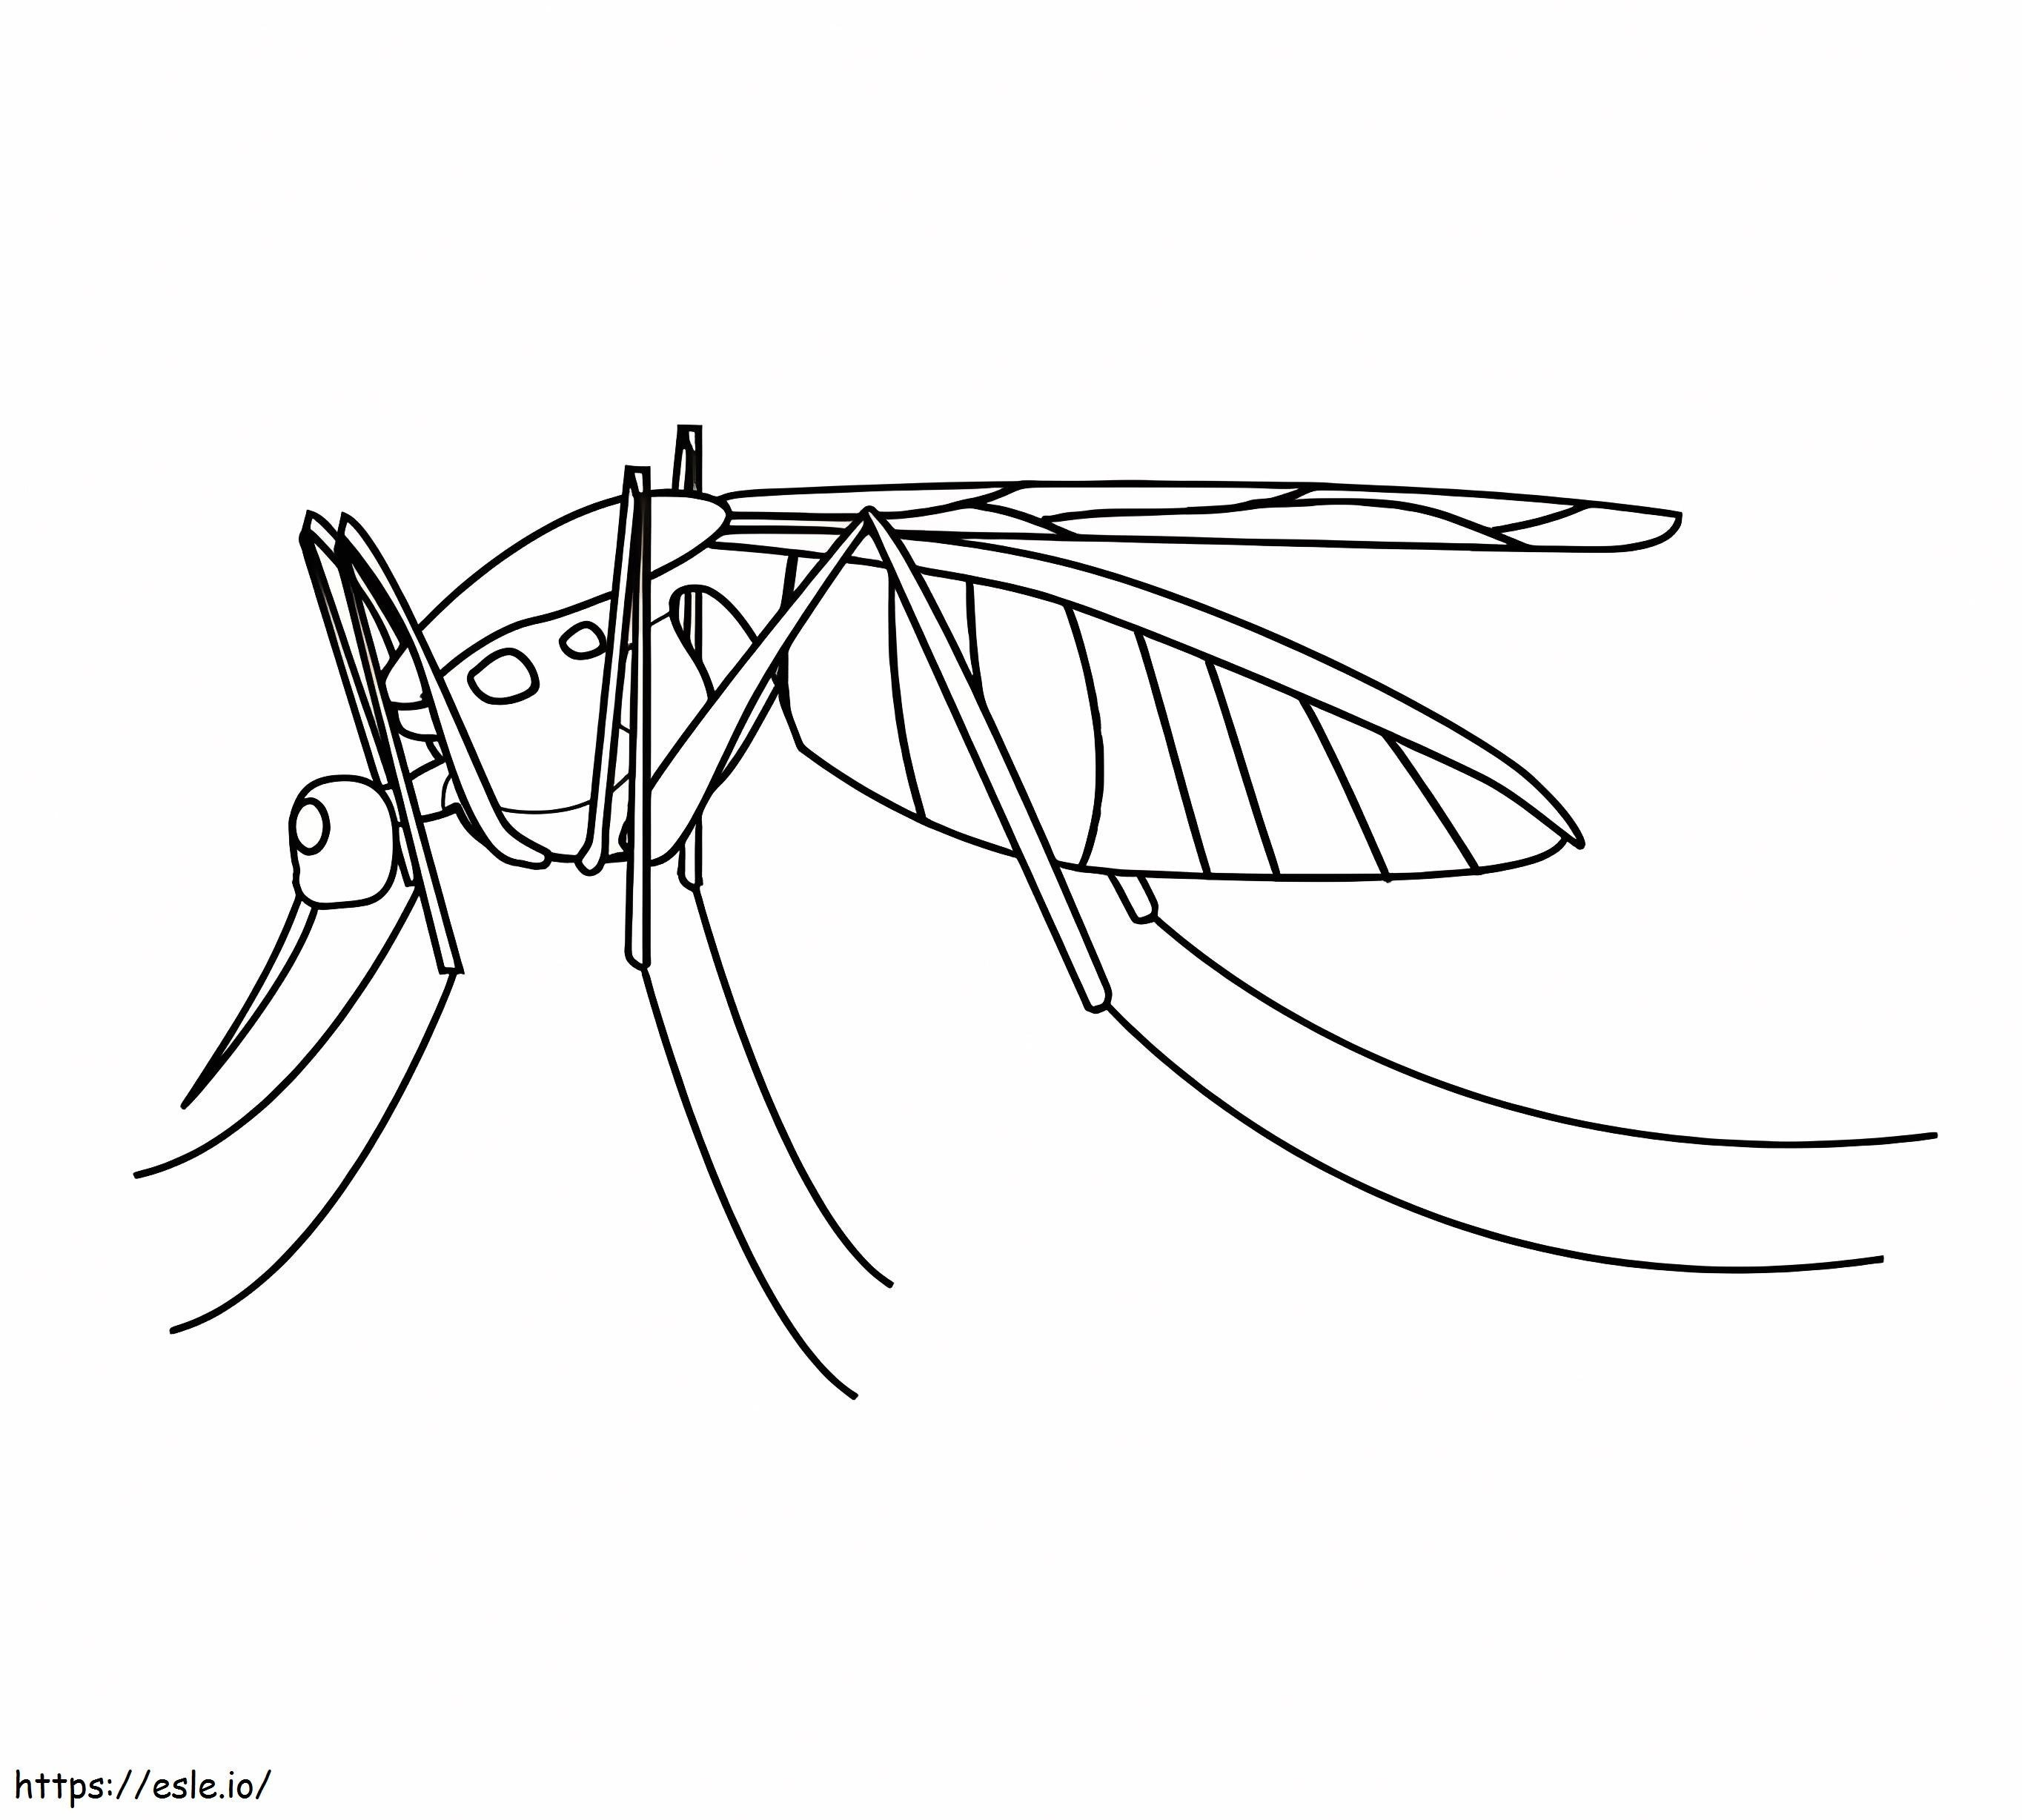 Mosquito 4 coloring page